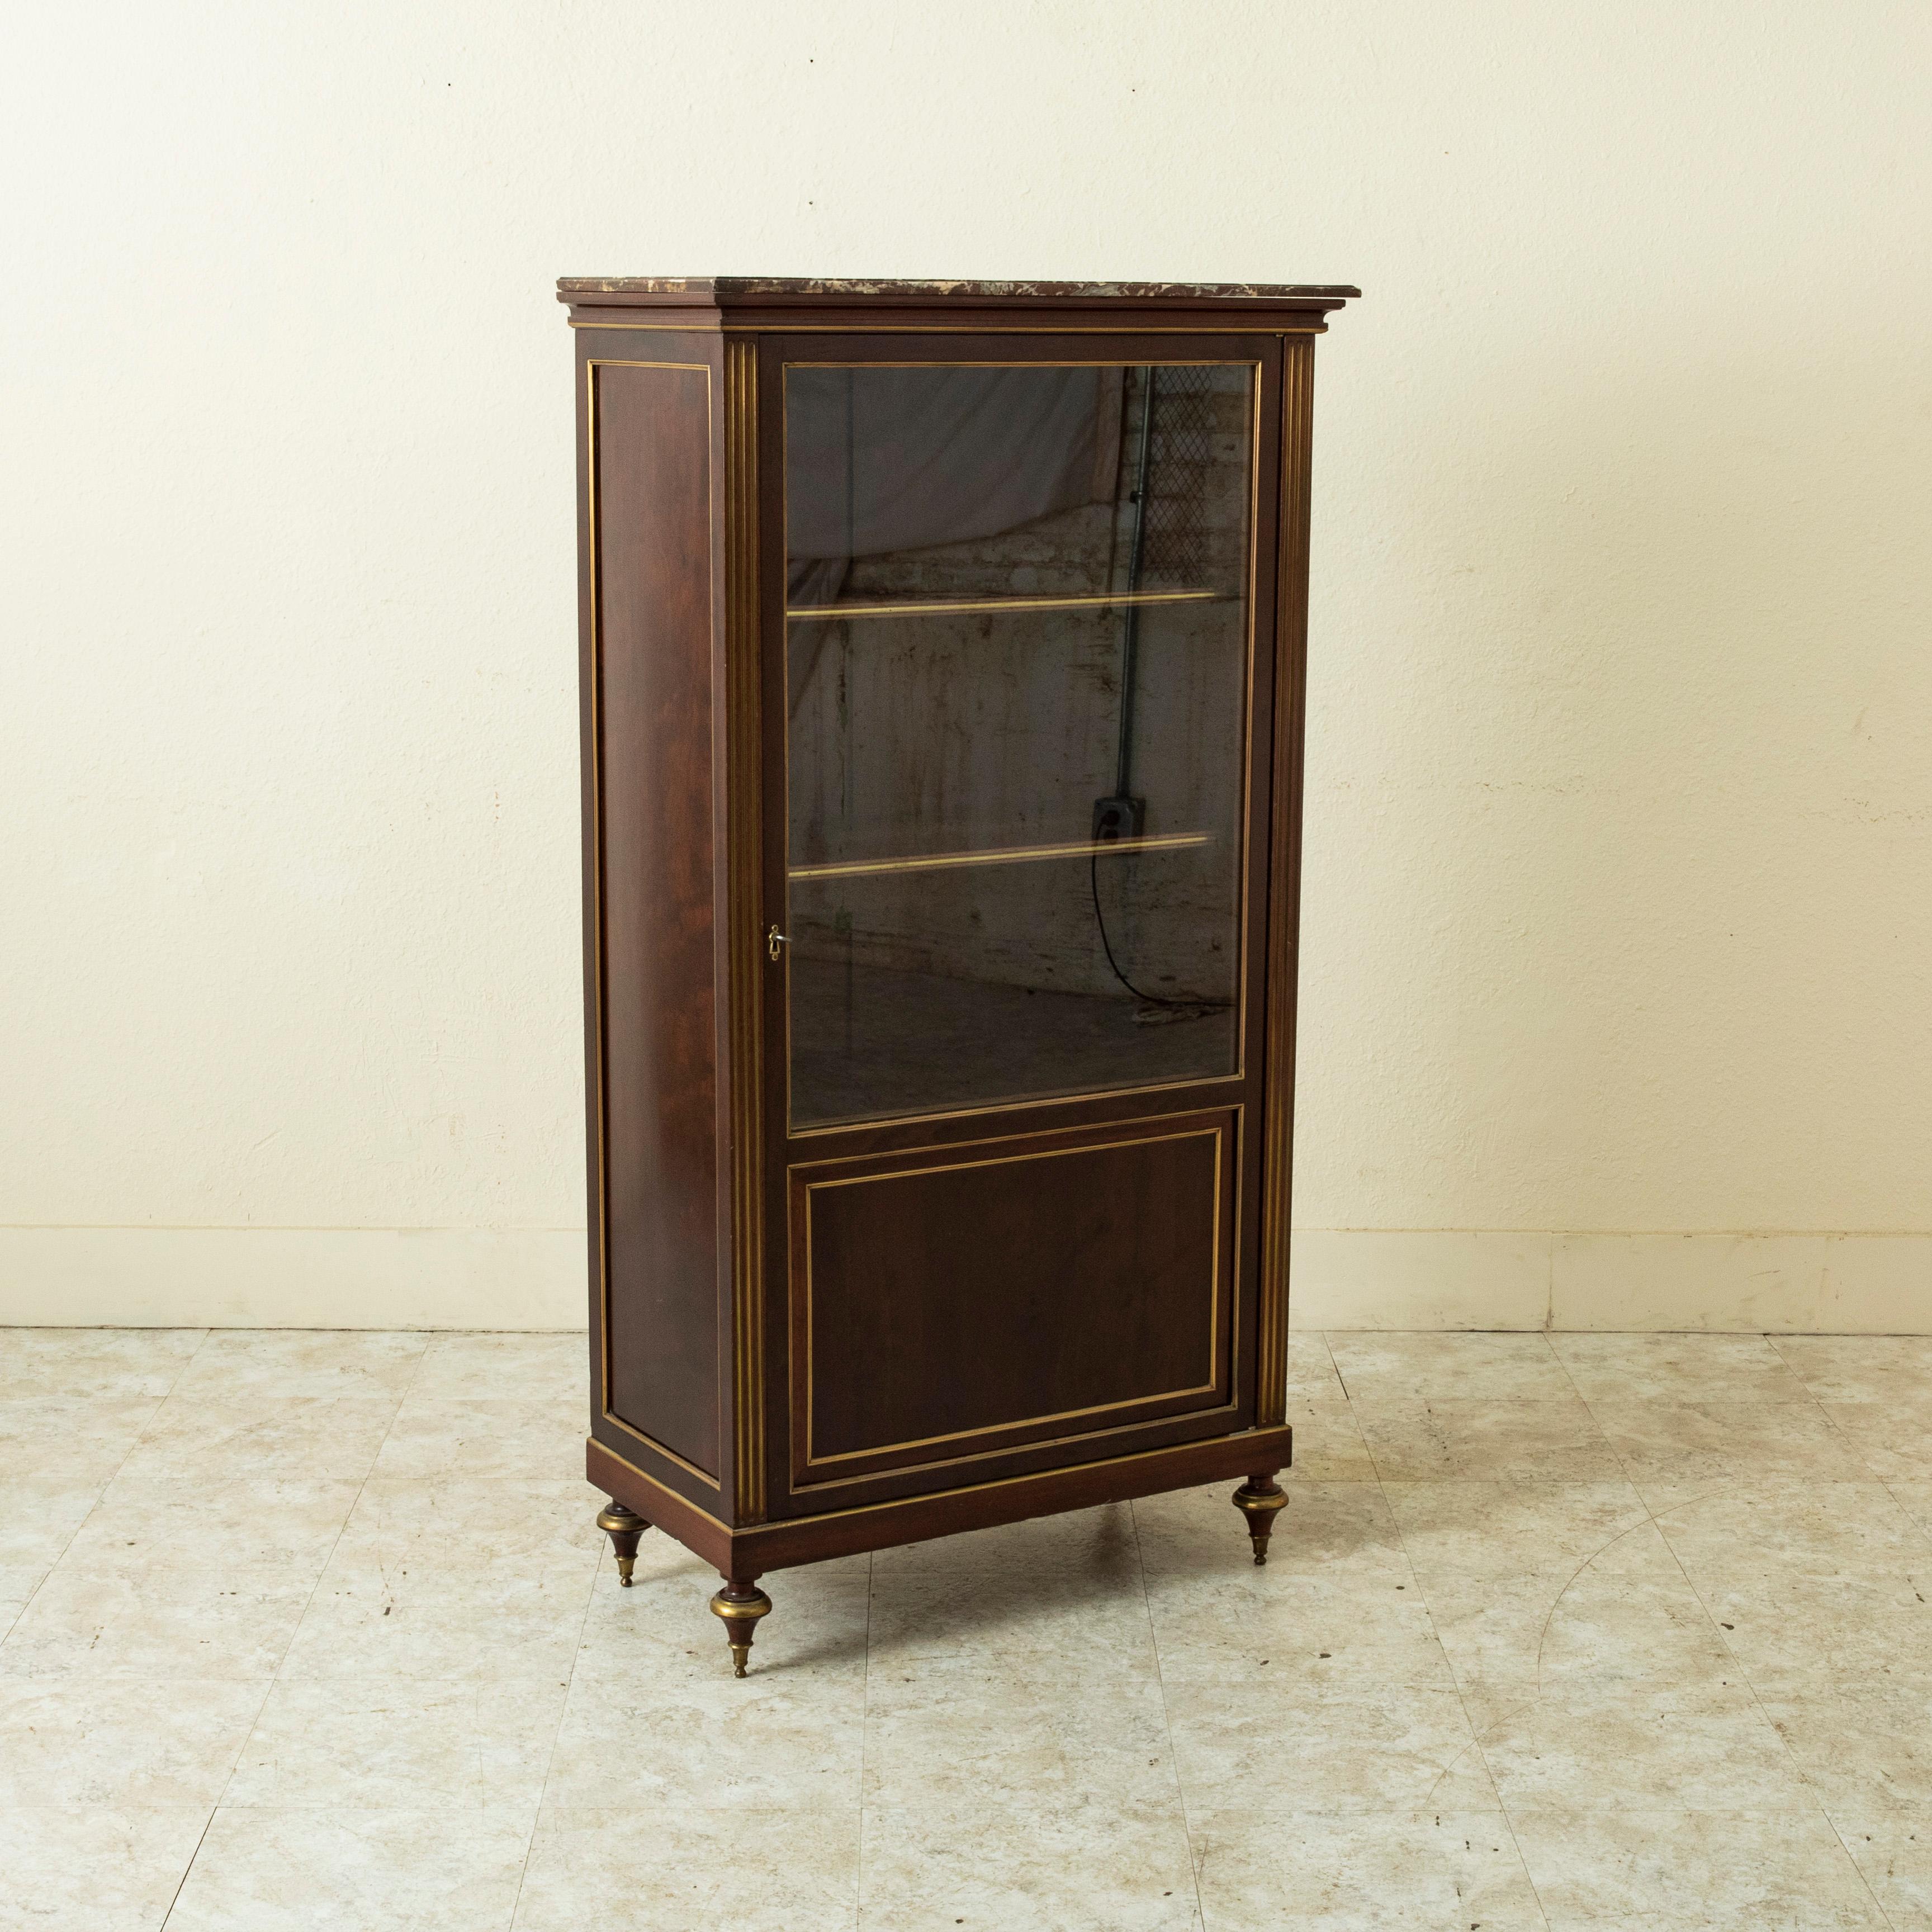 Standing at 58 inches in height, this small scale late nineteenth century Louis XVI style mahogany vitrine or bookcase is finished with stunning bronze banding and a red marble top with white veining. Its corners feature fluting with inset bronze